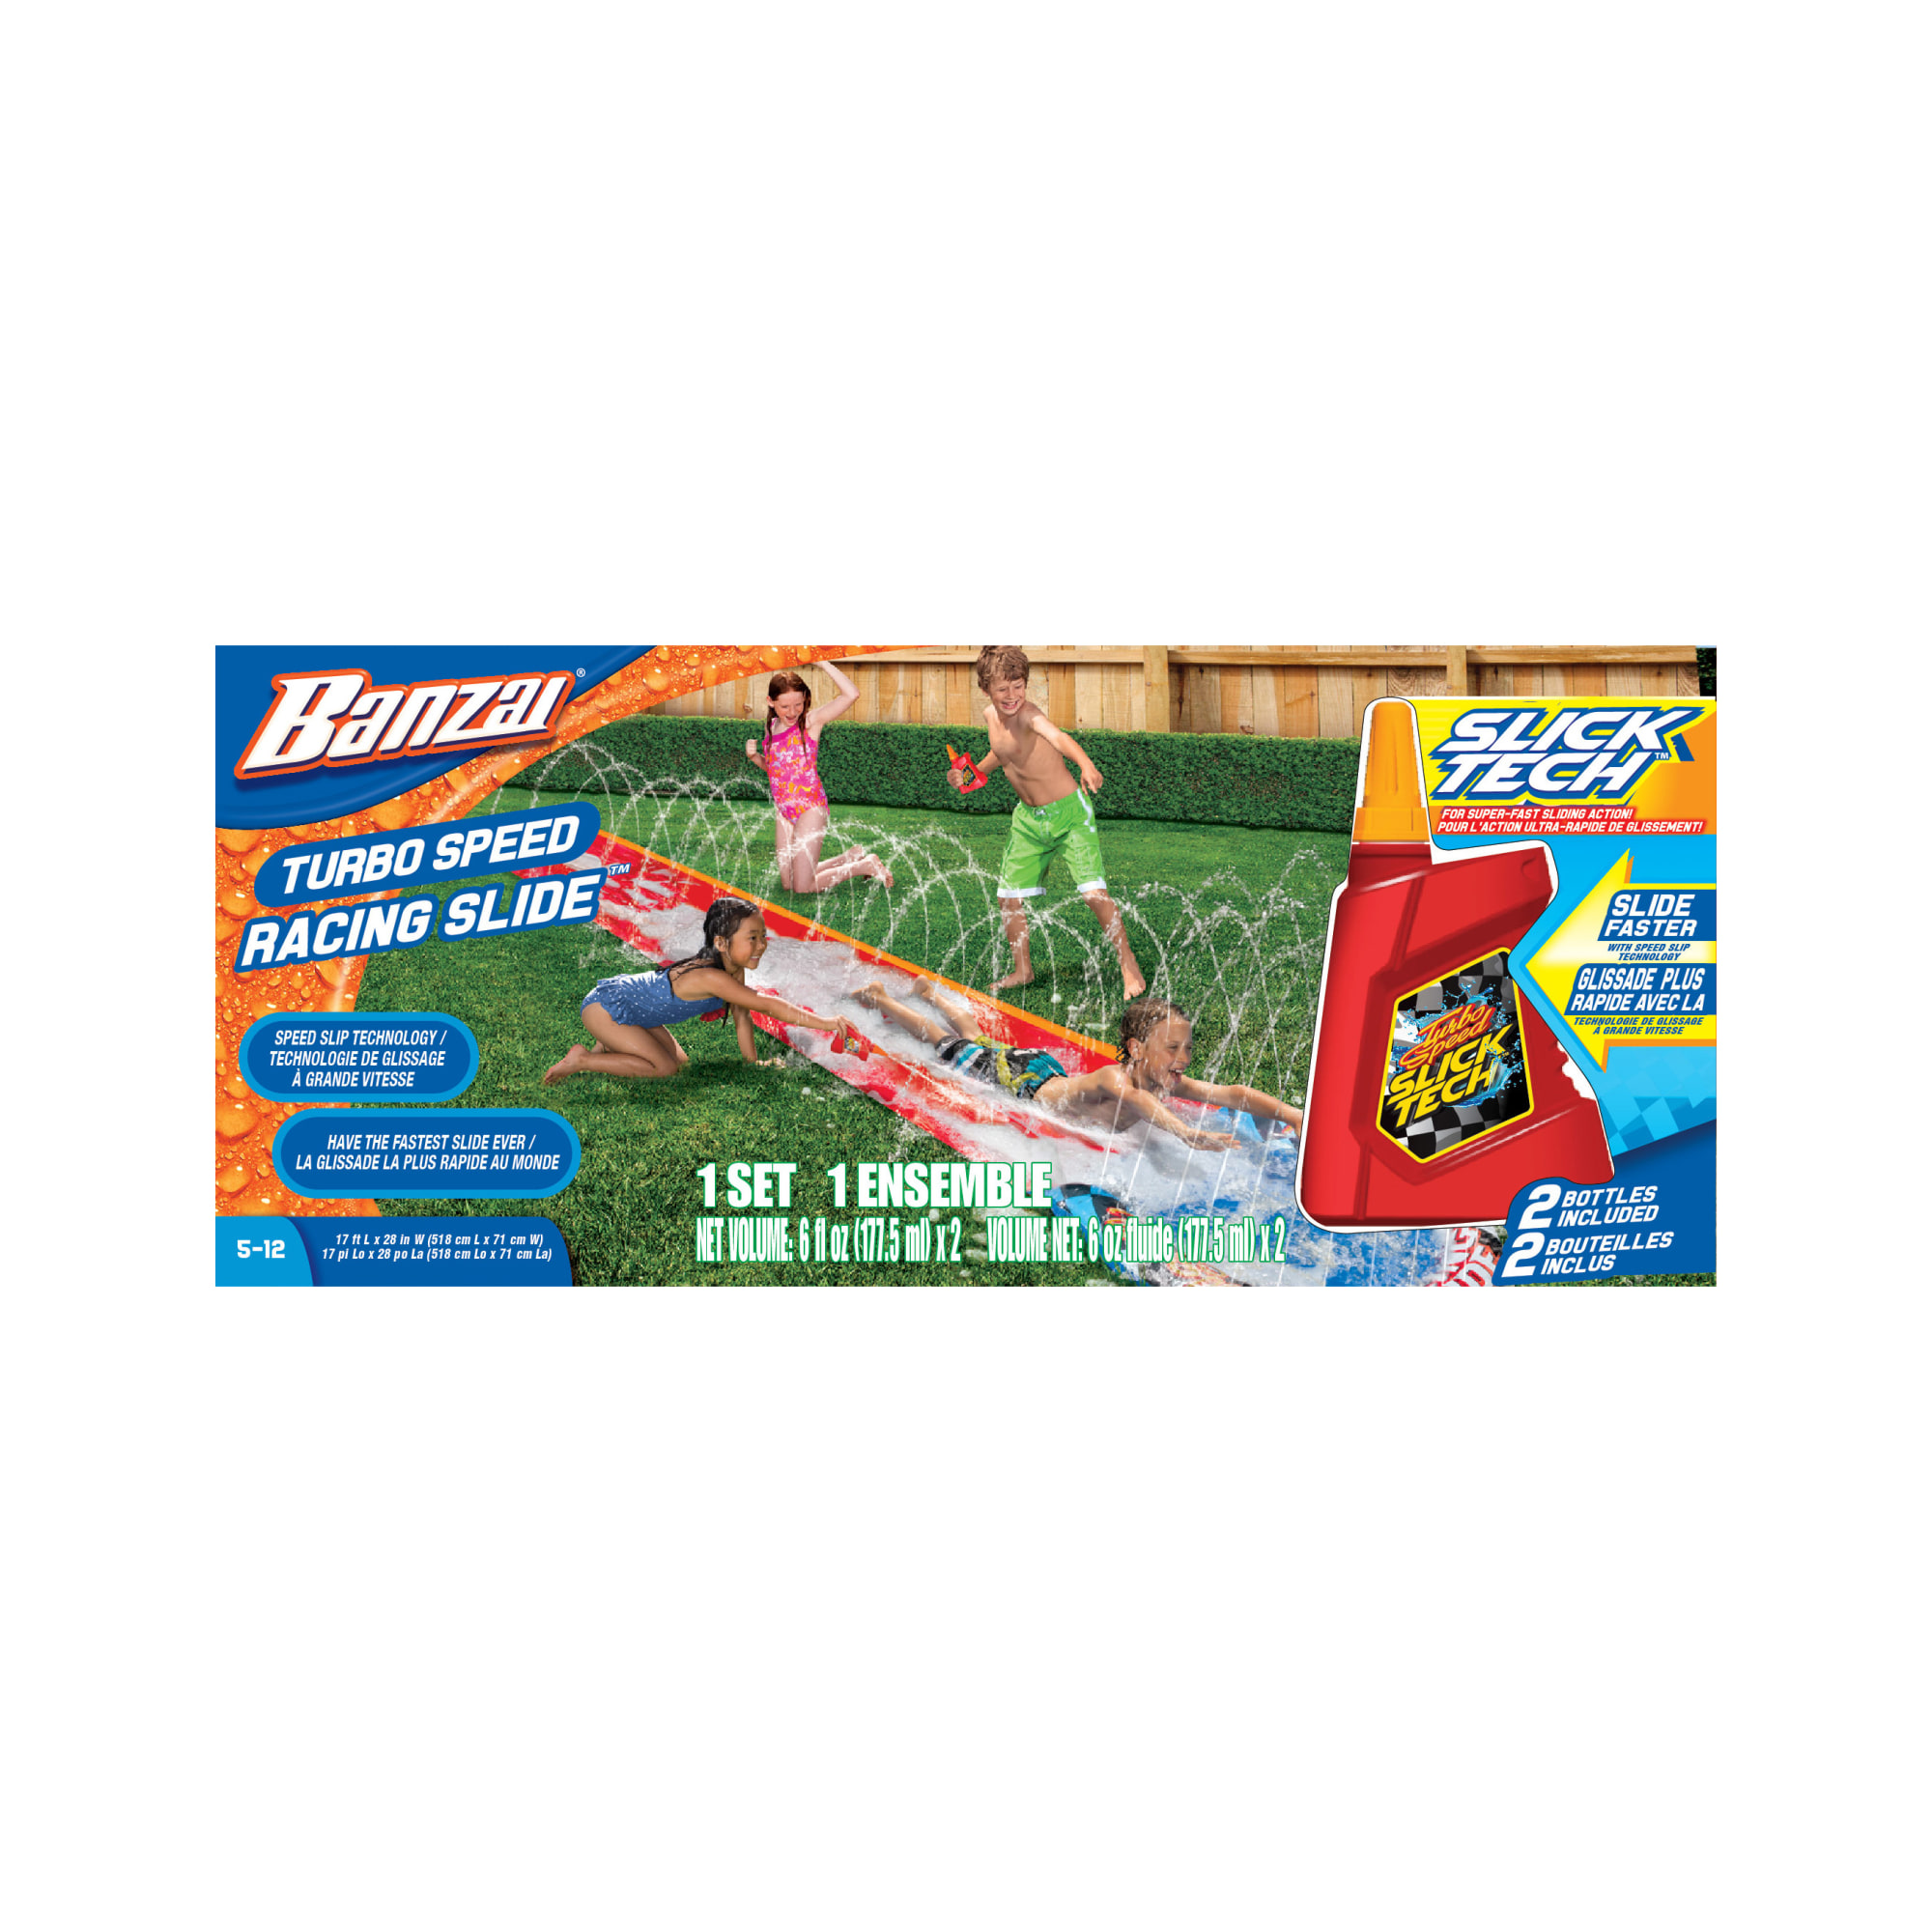 Banzai Turbo Speed Inflatable Racing Slide W/ Slick Tech Solution, 17 ft x 28 in, Children 5+ years - image 3 of 4